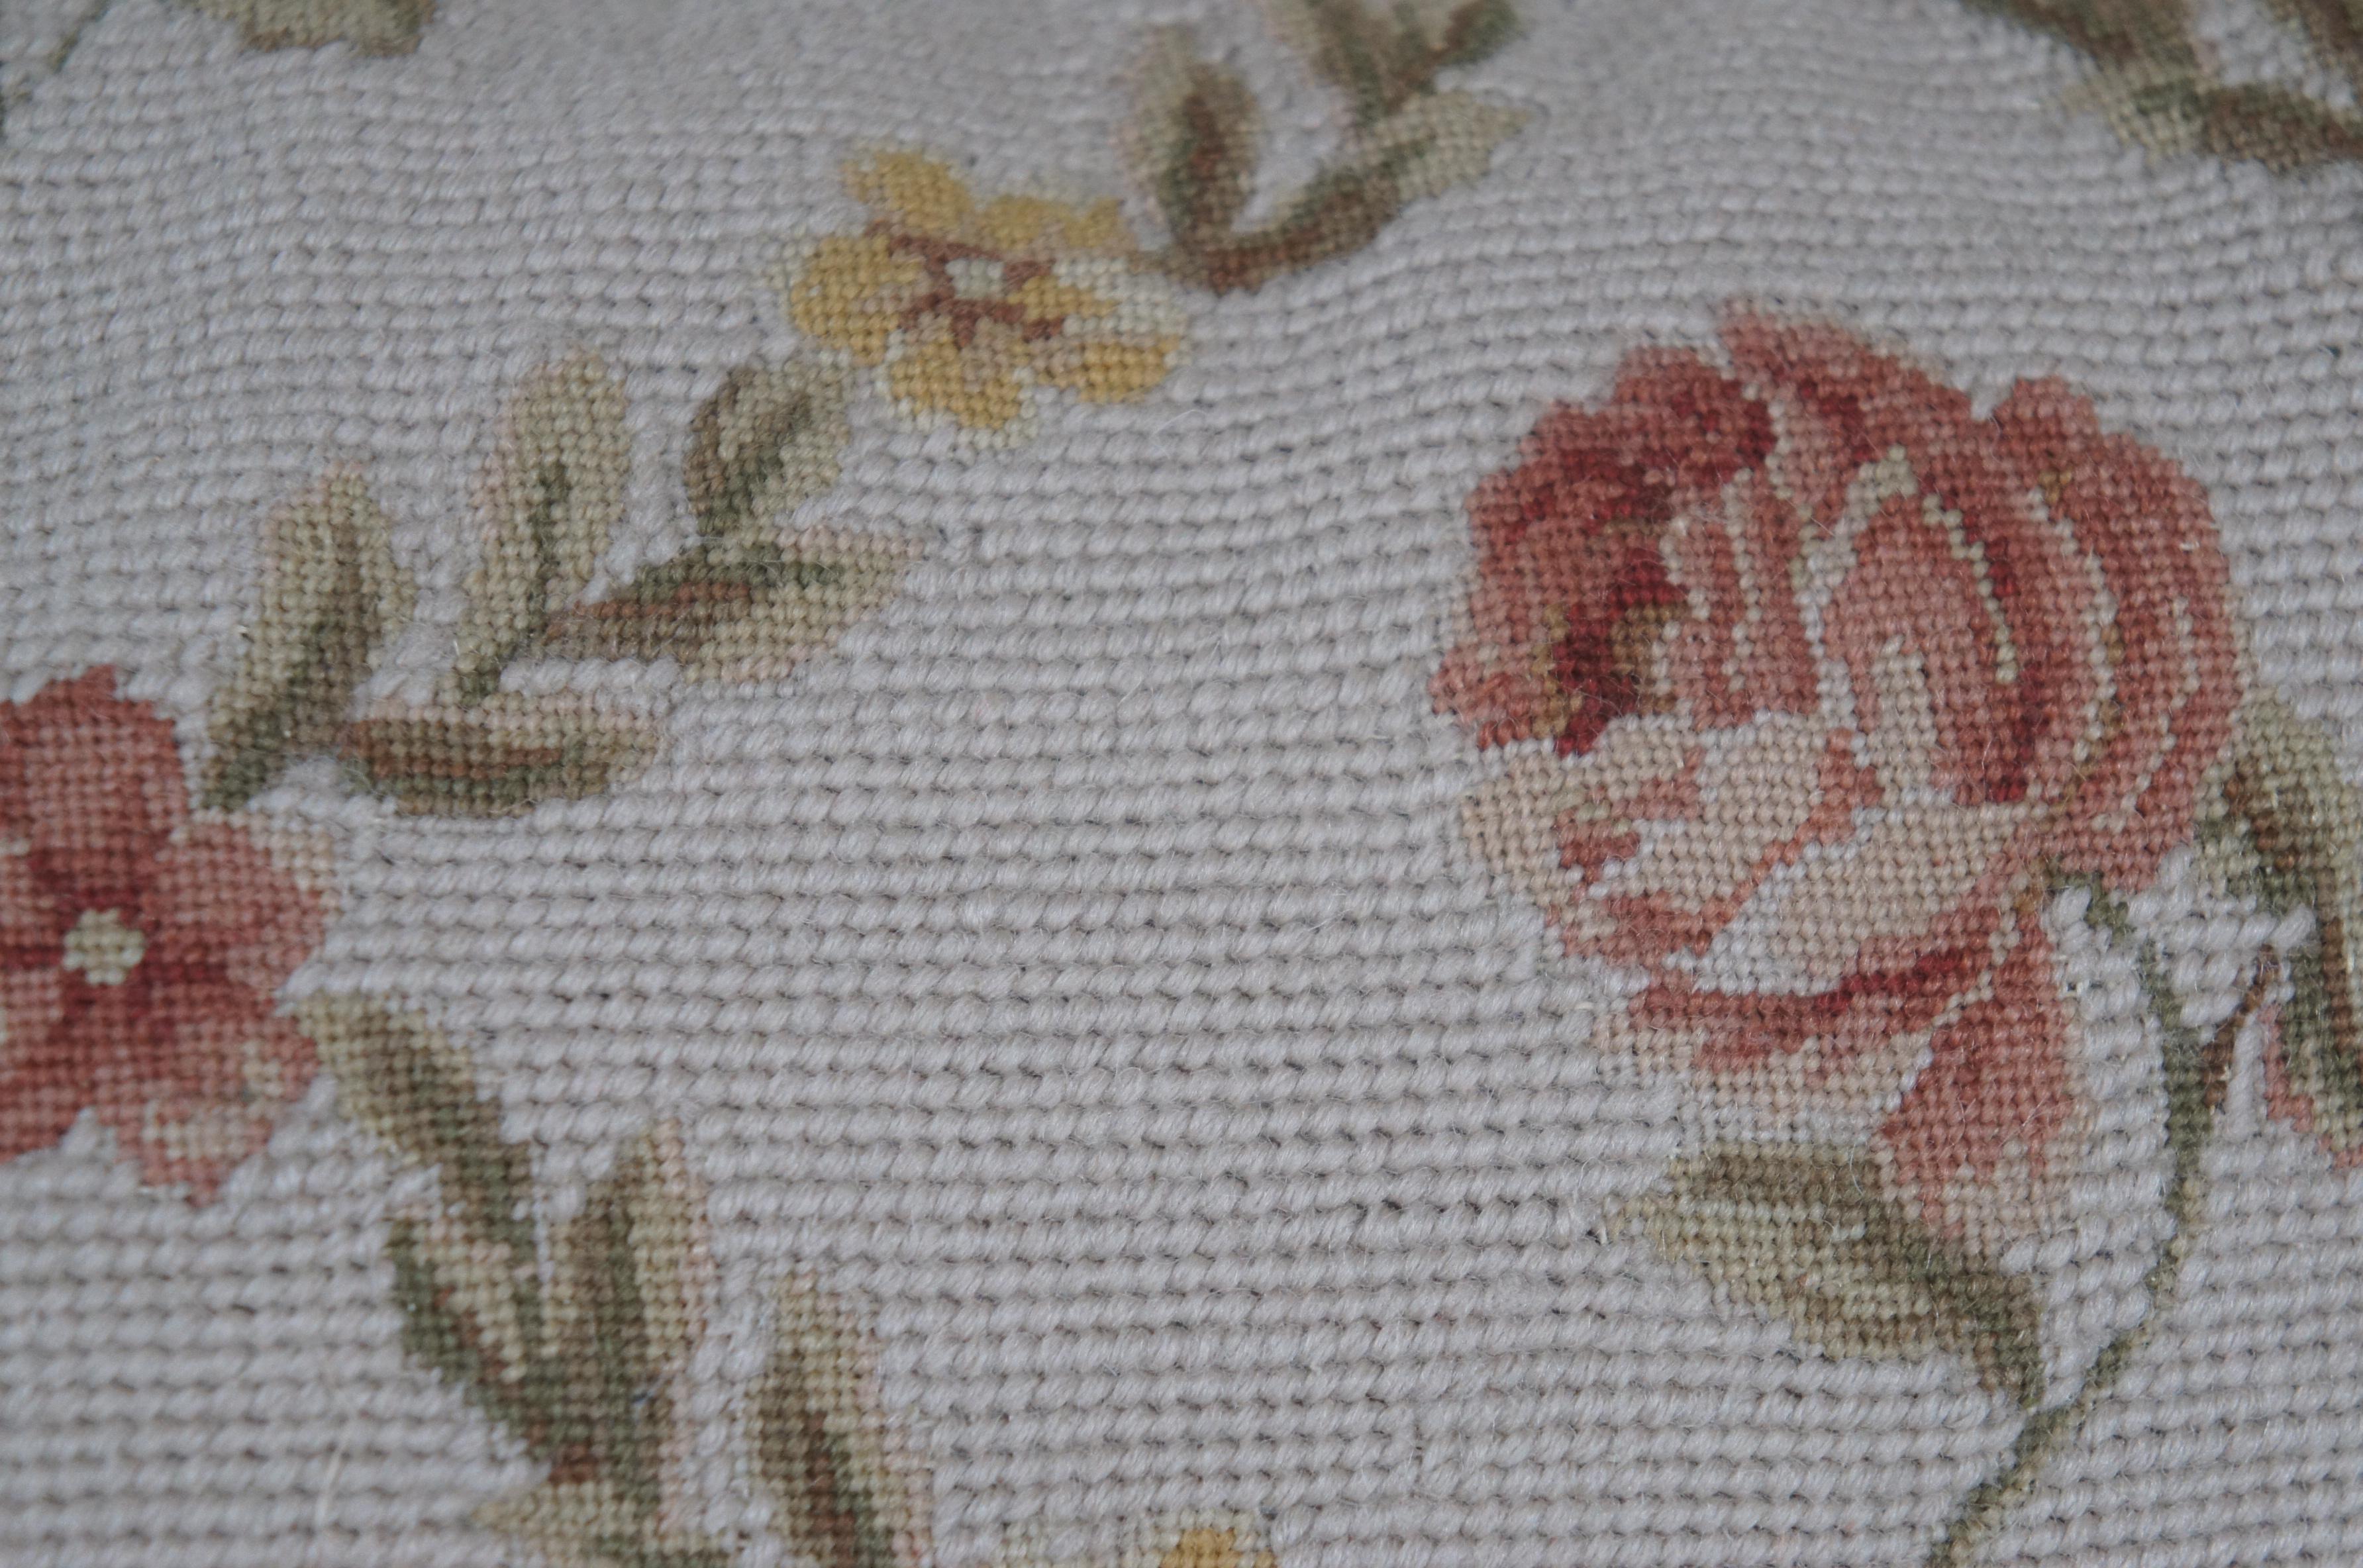 Textile Down Filled Floral Crossed Roses Needlepoint Tassel Lumbar Throw Pillow 20